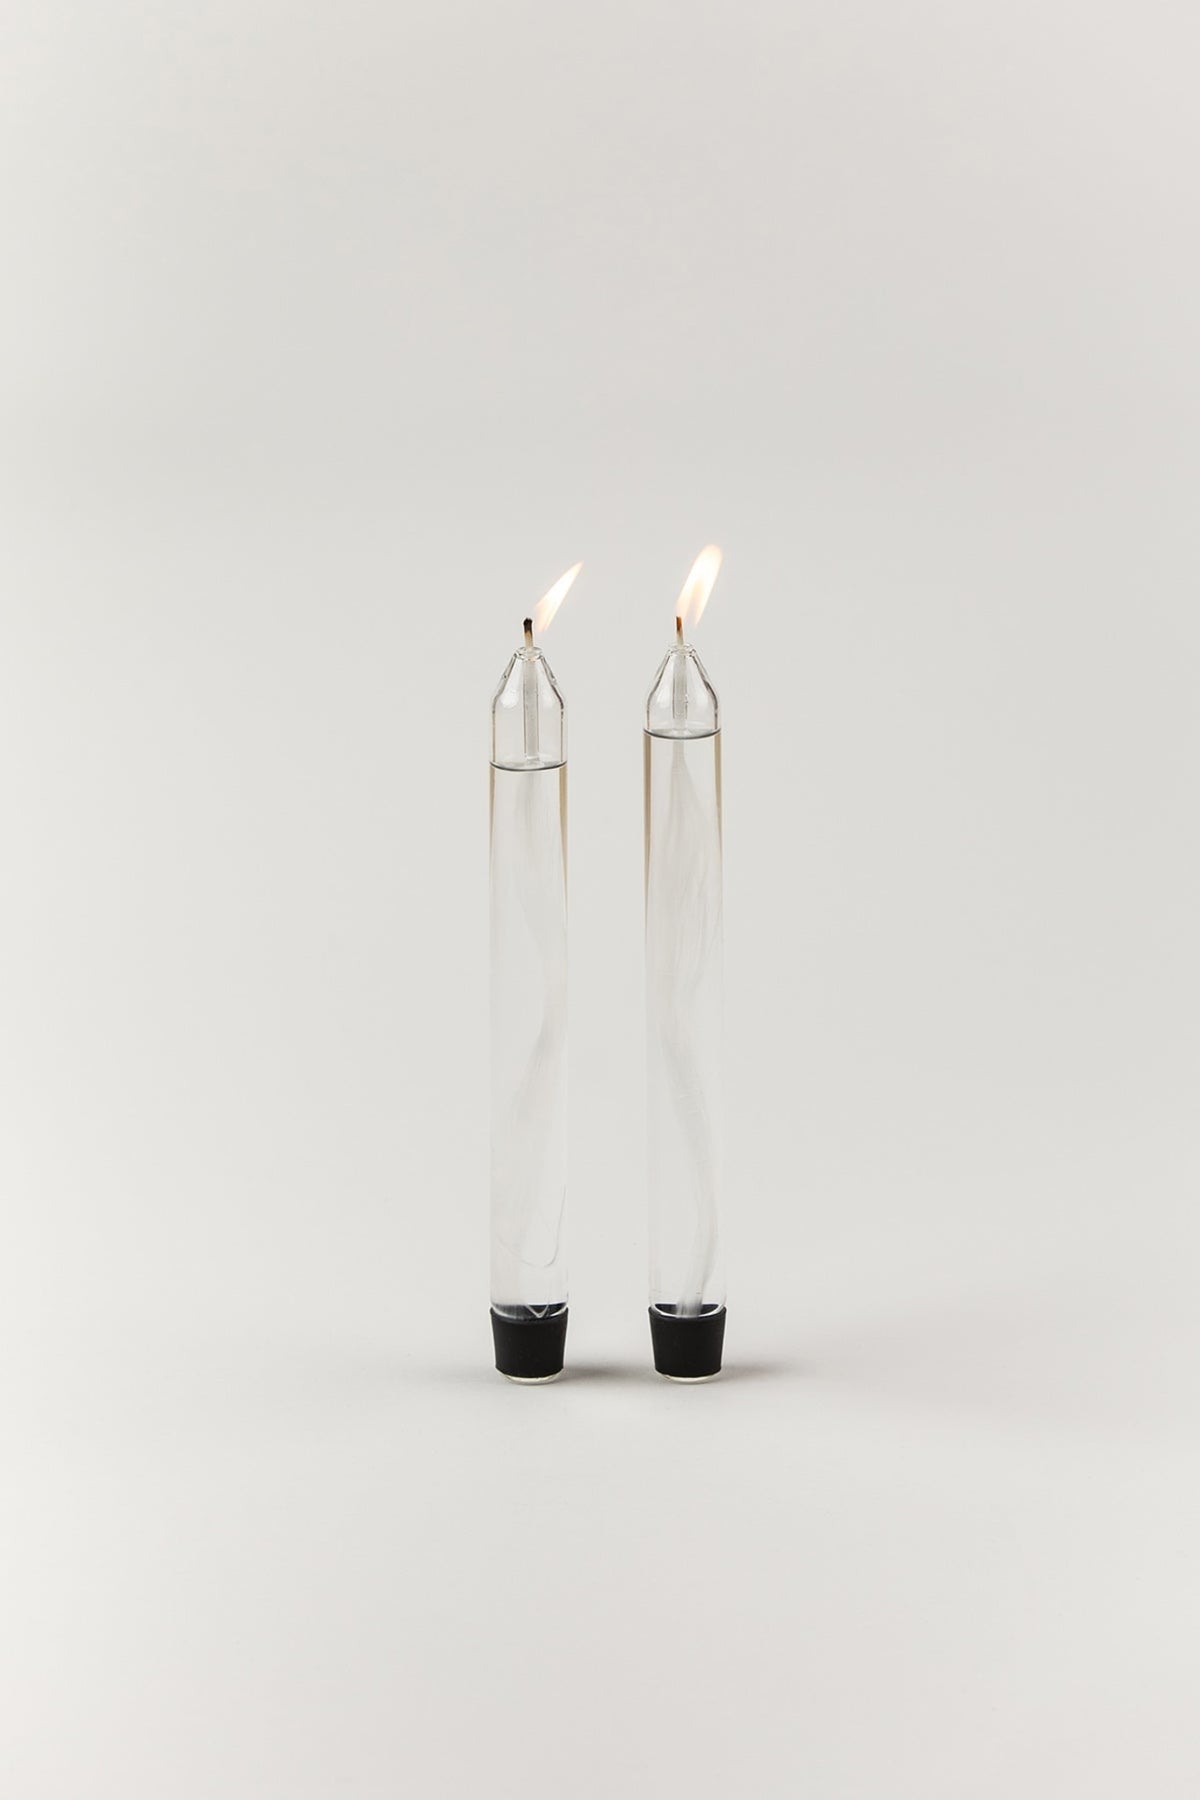 GLASS CANDLES, OIL CANDLES, TRANSPARENT